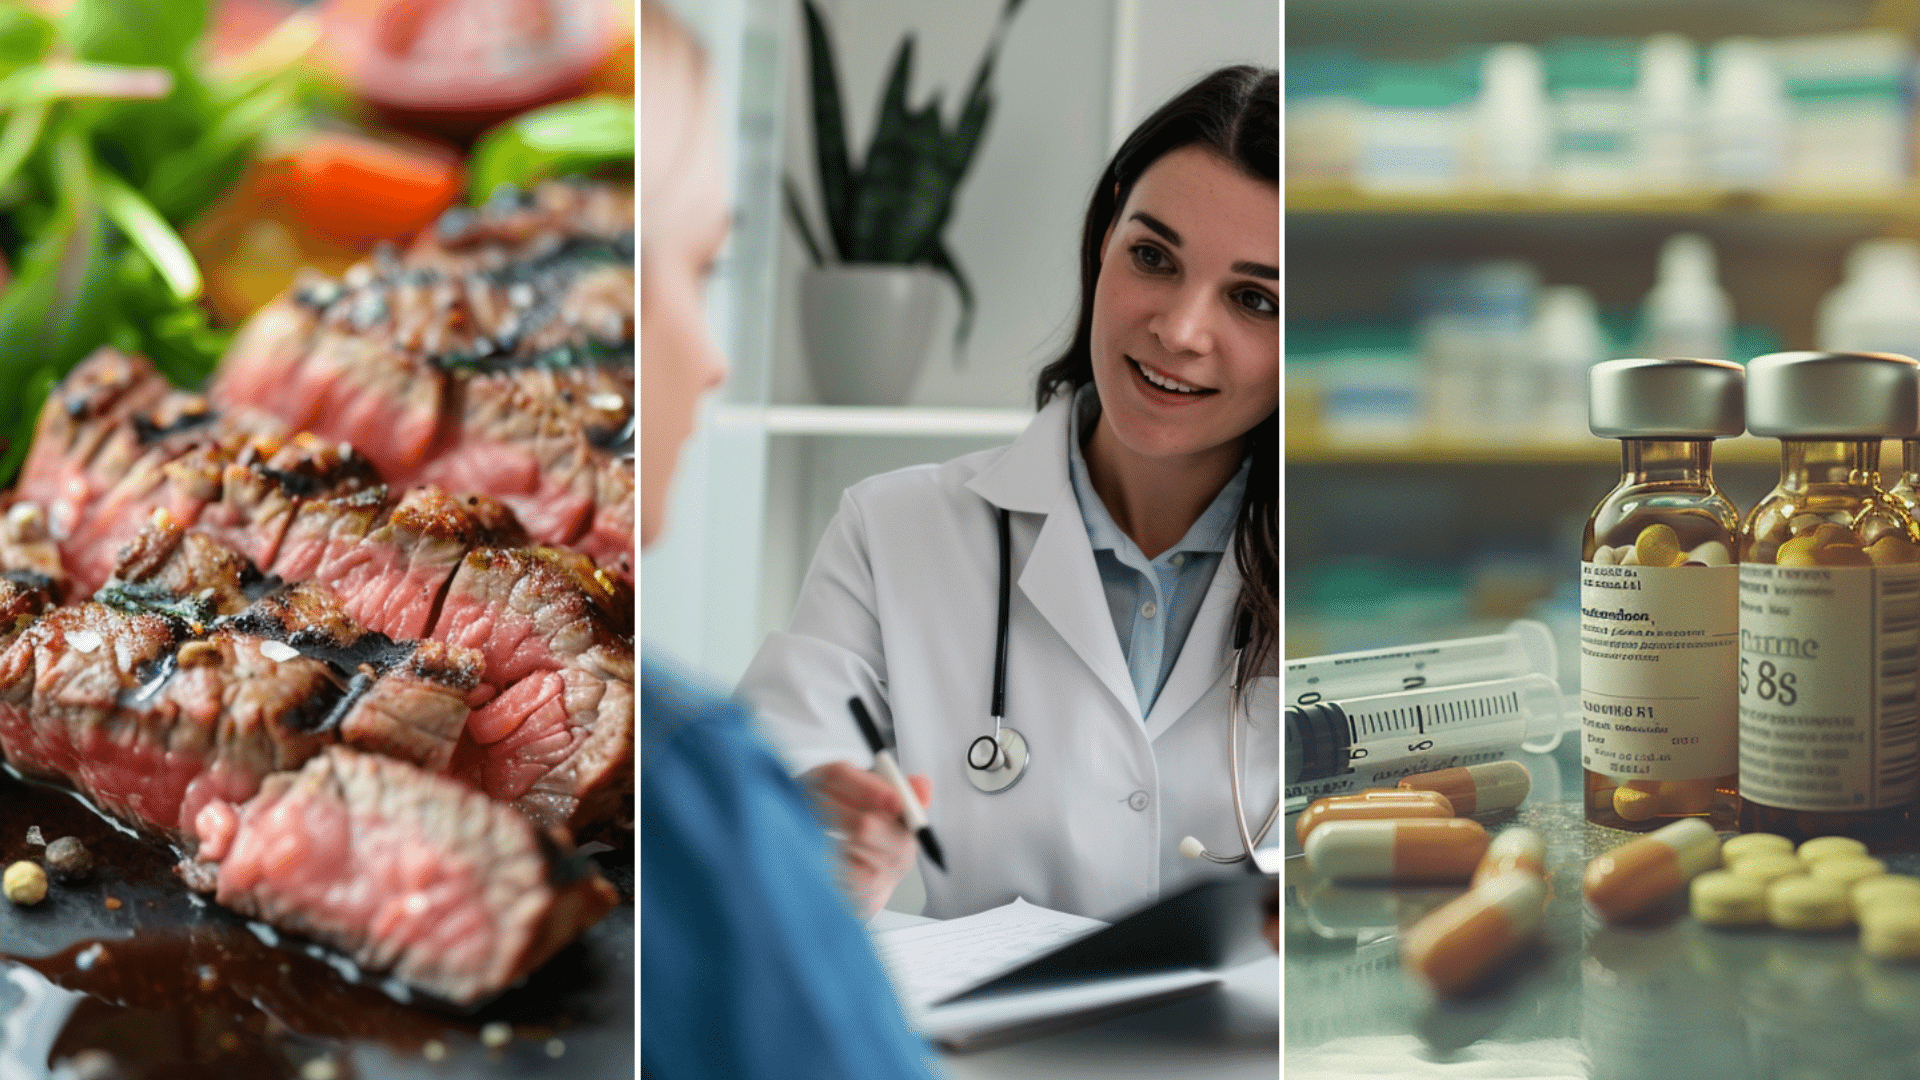 create an image of a doctor wearing a white coat and holding a clipboard, seated at the table inside the clinic while talking to the patient Prescription drugs and syringes on a table inside a pharmacy. create an image of a close-up image of a plate with low-carb diet